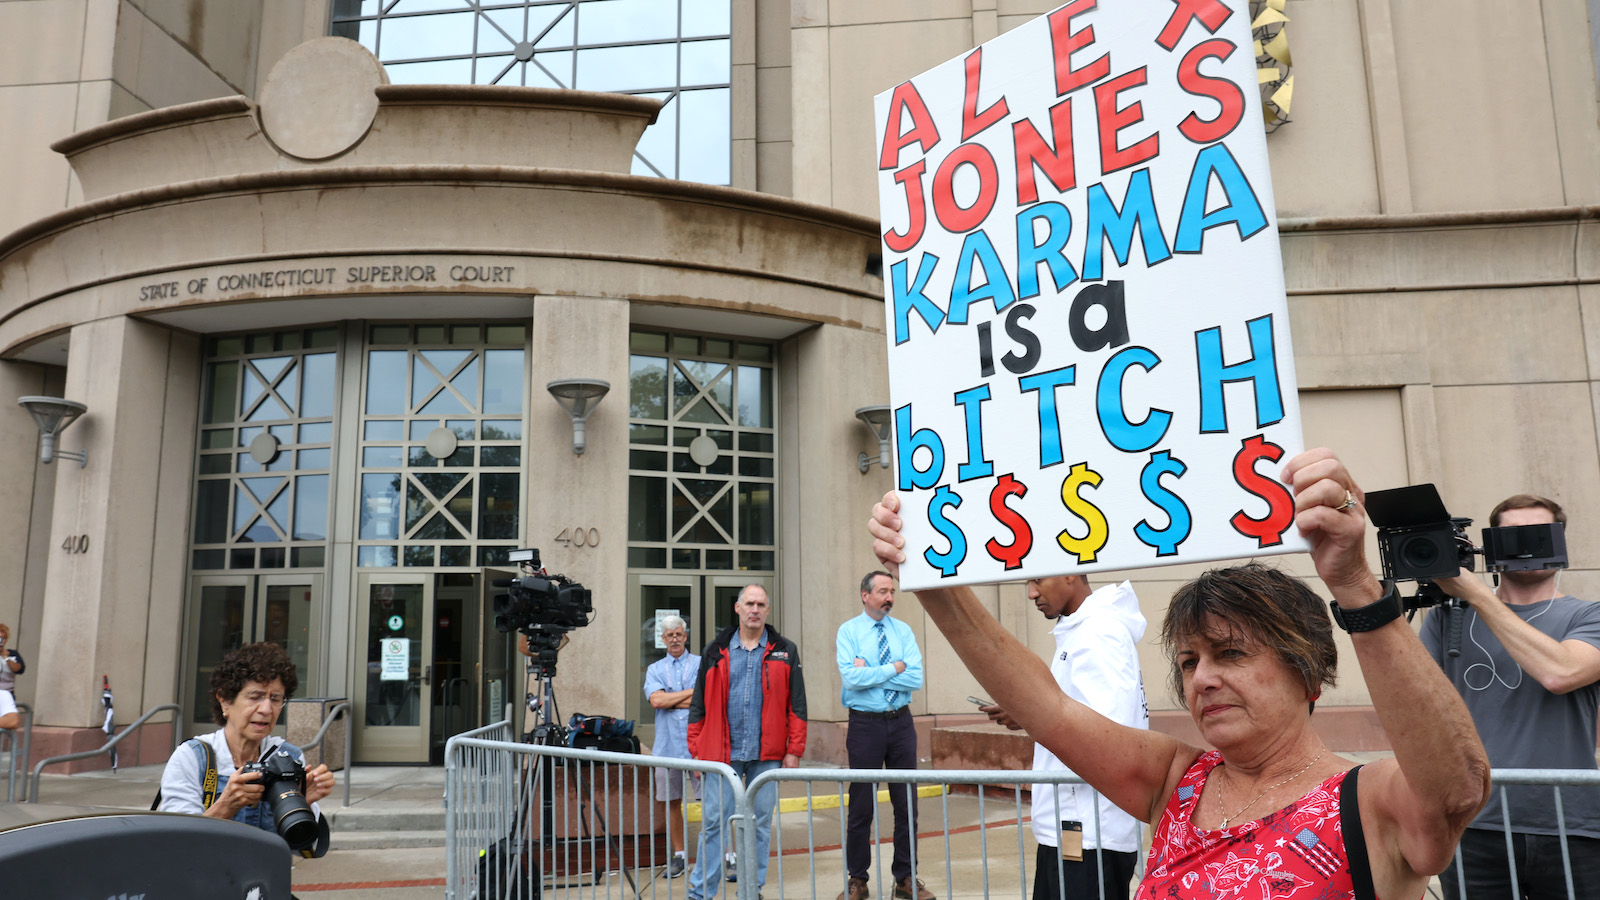 A lone protester standing outside the Waterbury Superior Court during the start of the trial against Alex Jones holding a sign that reads "Alex Jones Karma Is A Bitch"